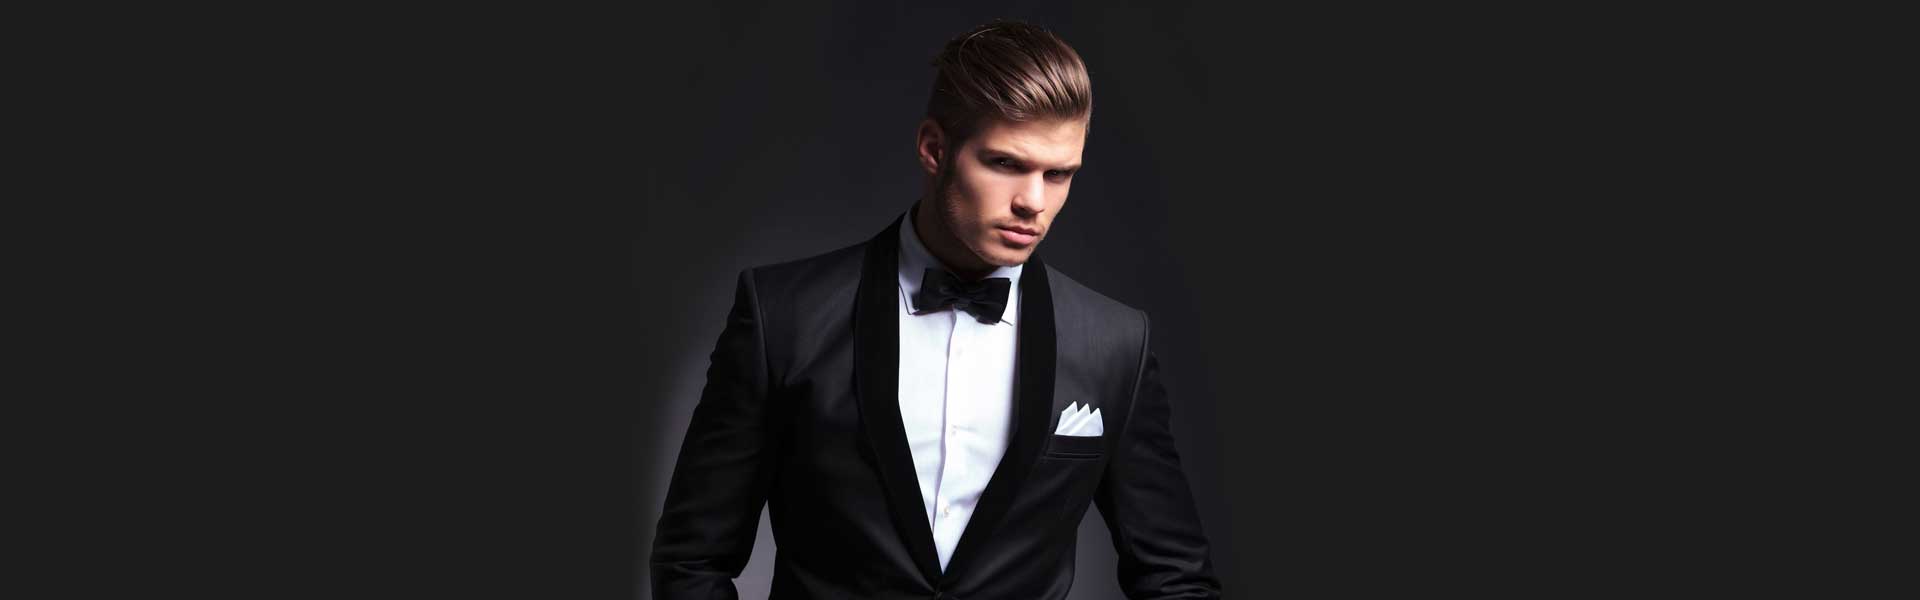 tuxedo-suit-dry-cleaning